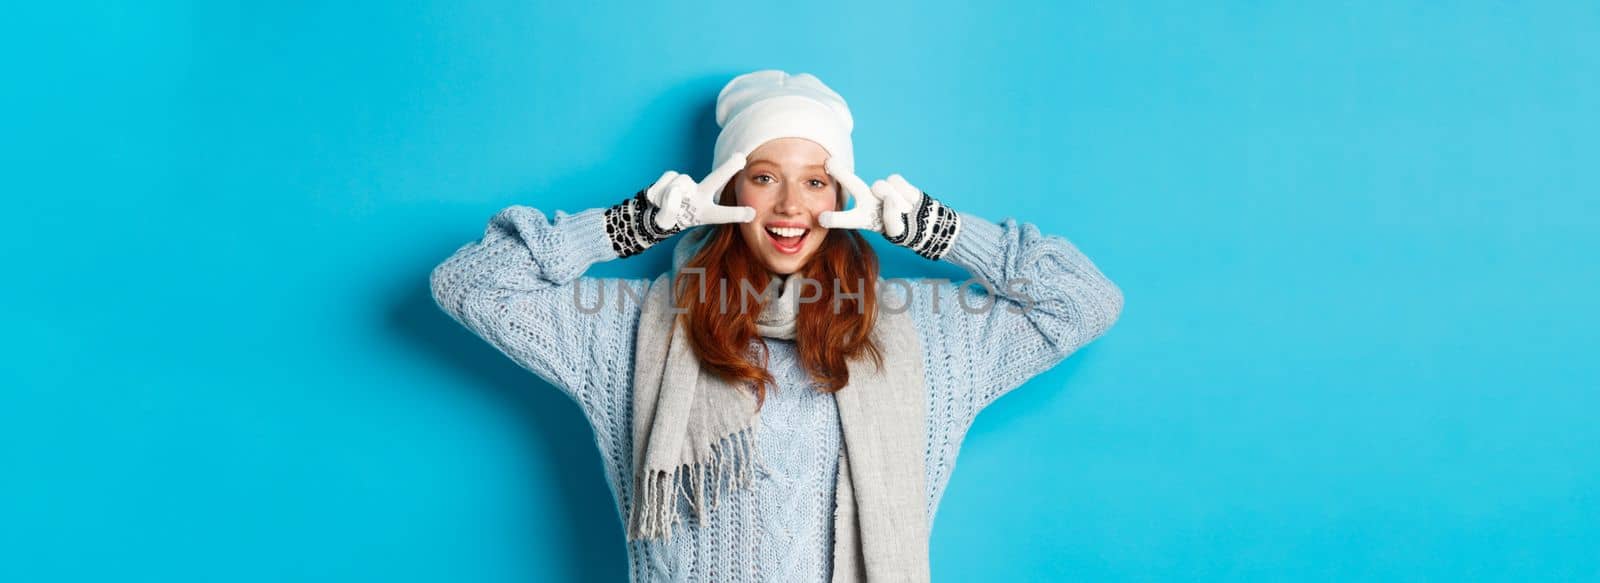 Winter and holidays concept. Cute redhead teen girl in beania, gloves and sweater showing peace sign, looking left at camera and wishing merry christmas, standing against blue background.